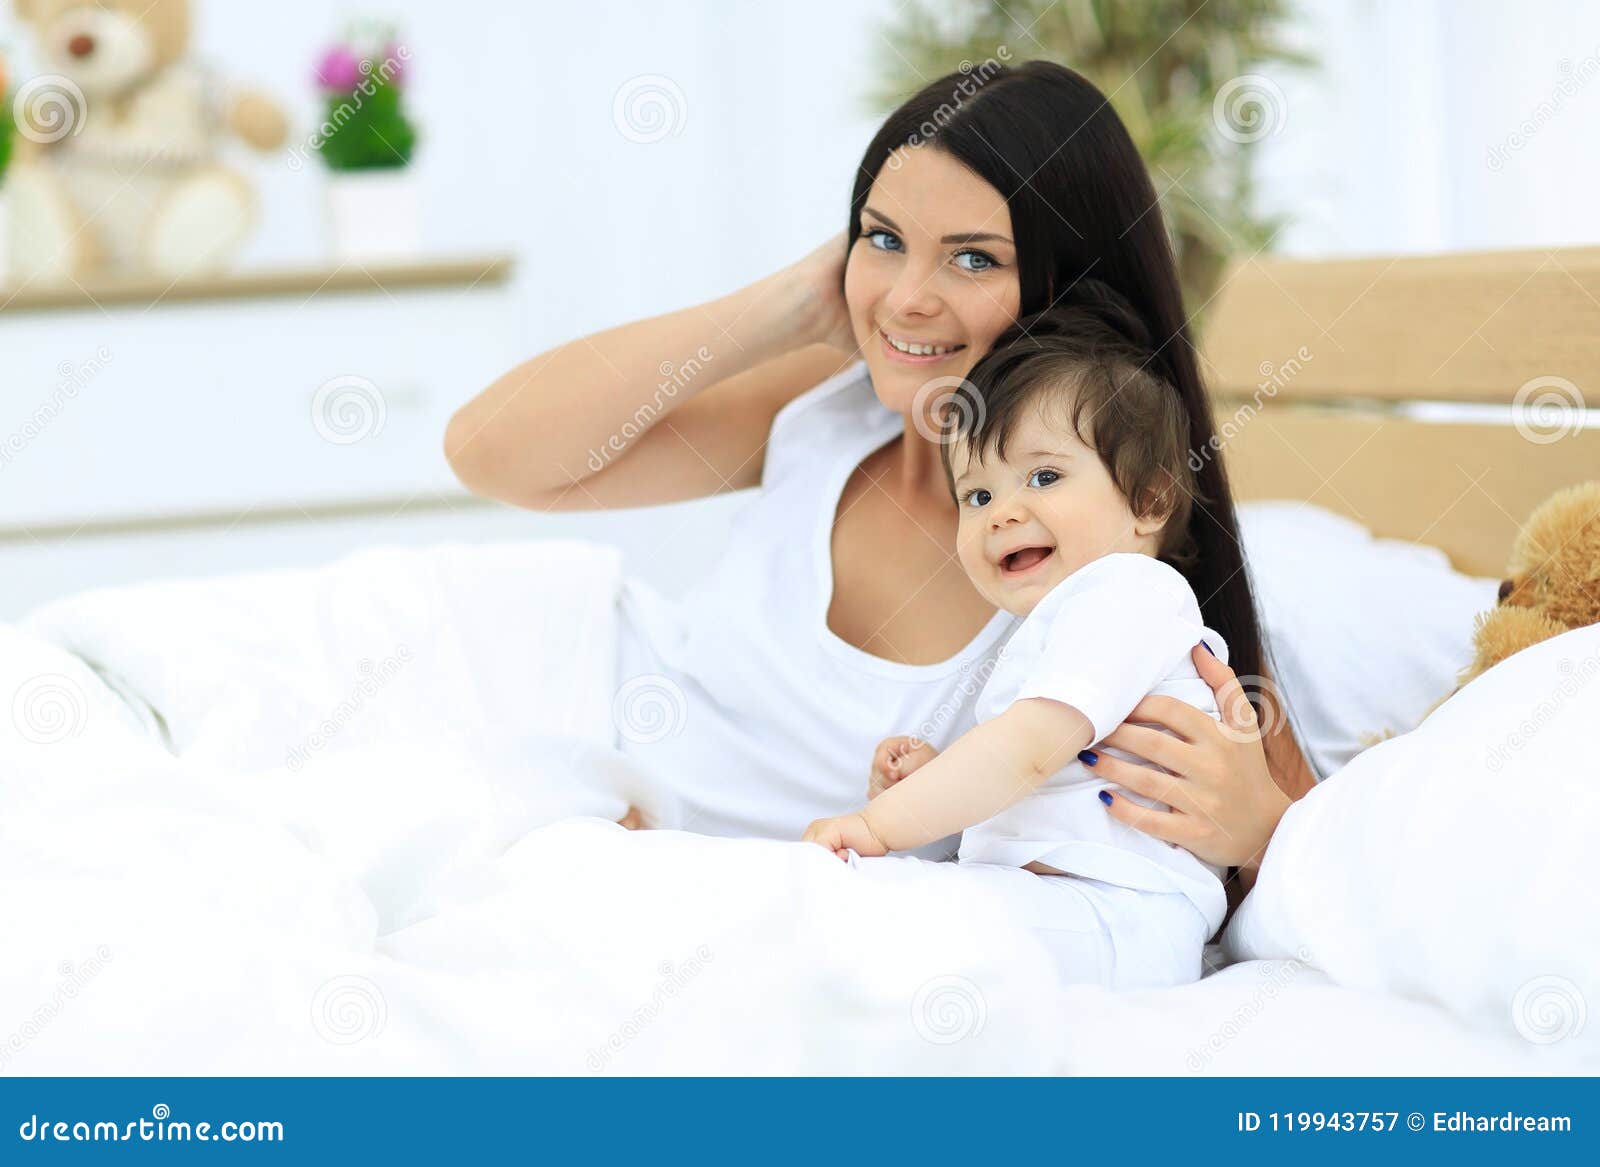 Portrait of a Beautiful Mother with Her Baby in the Bedroom Stock Image ...